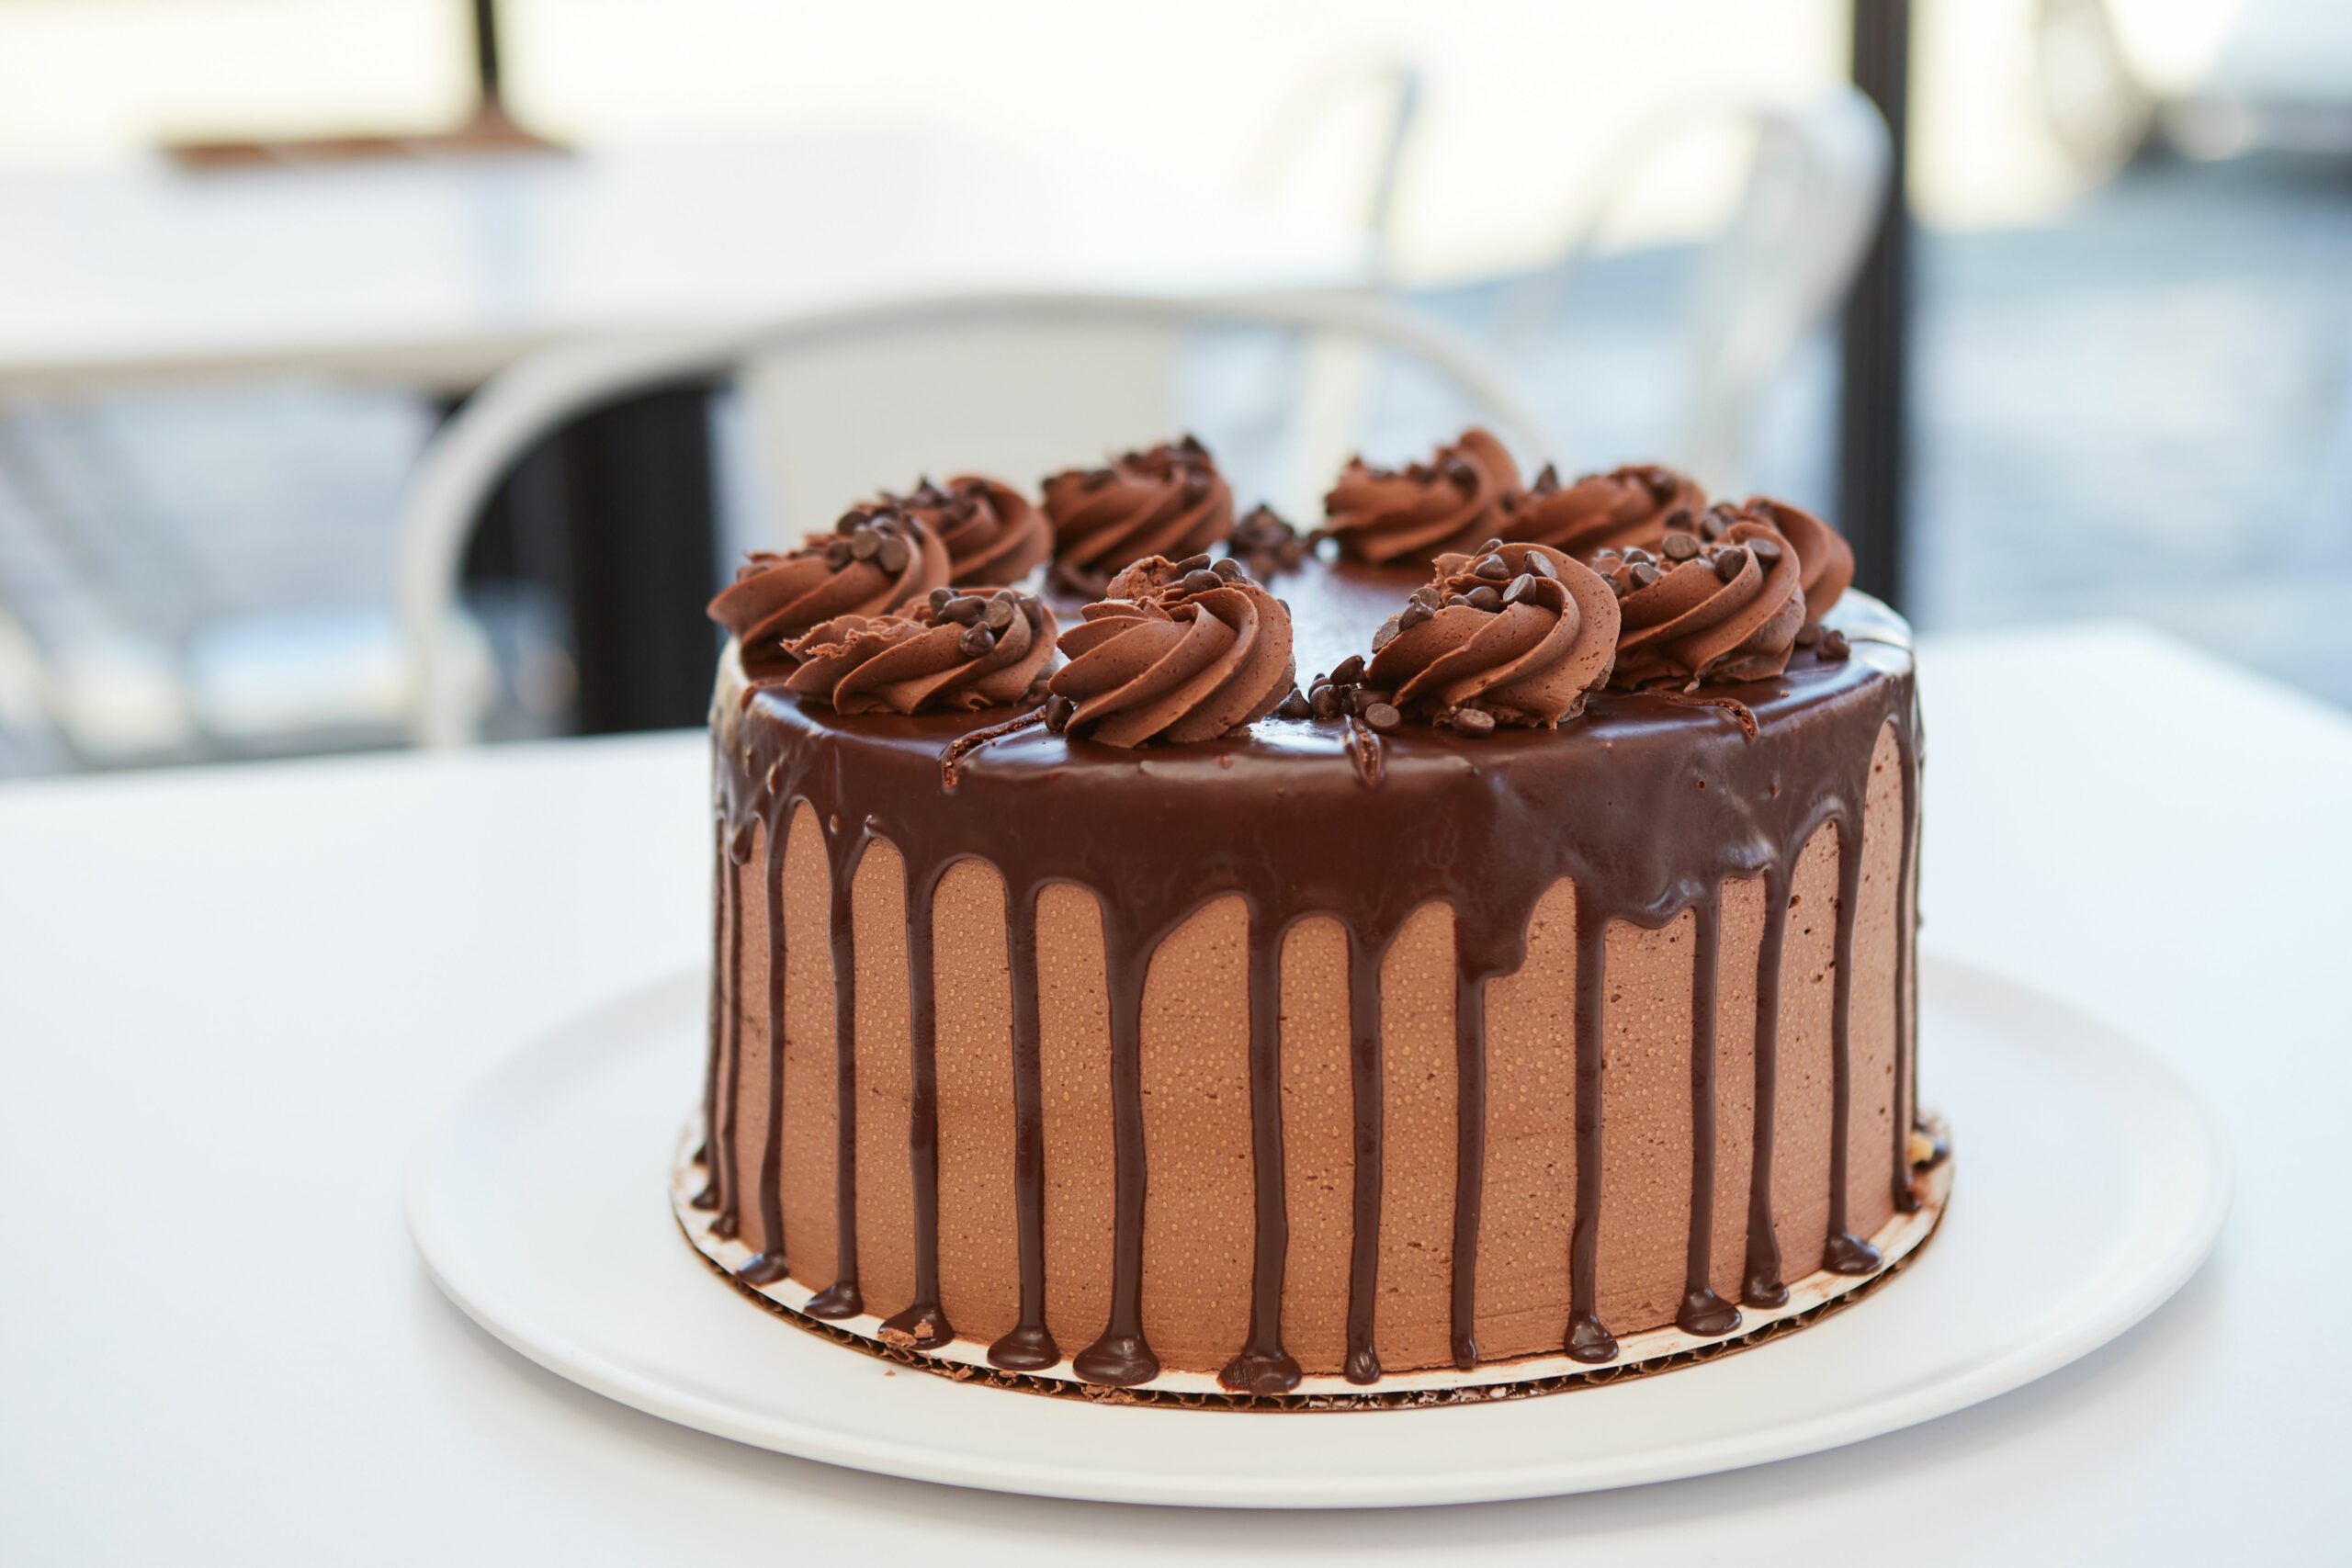 A chocolate cake at Sweet Dough Bake Shop in High Point, NC.